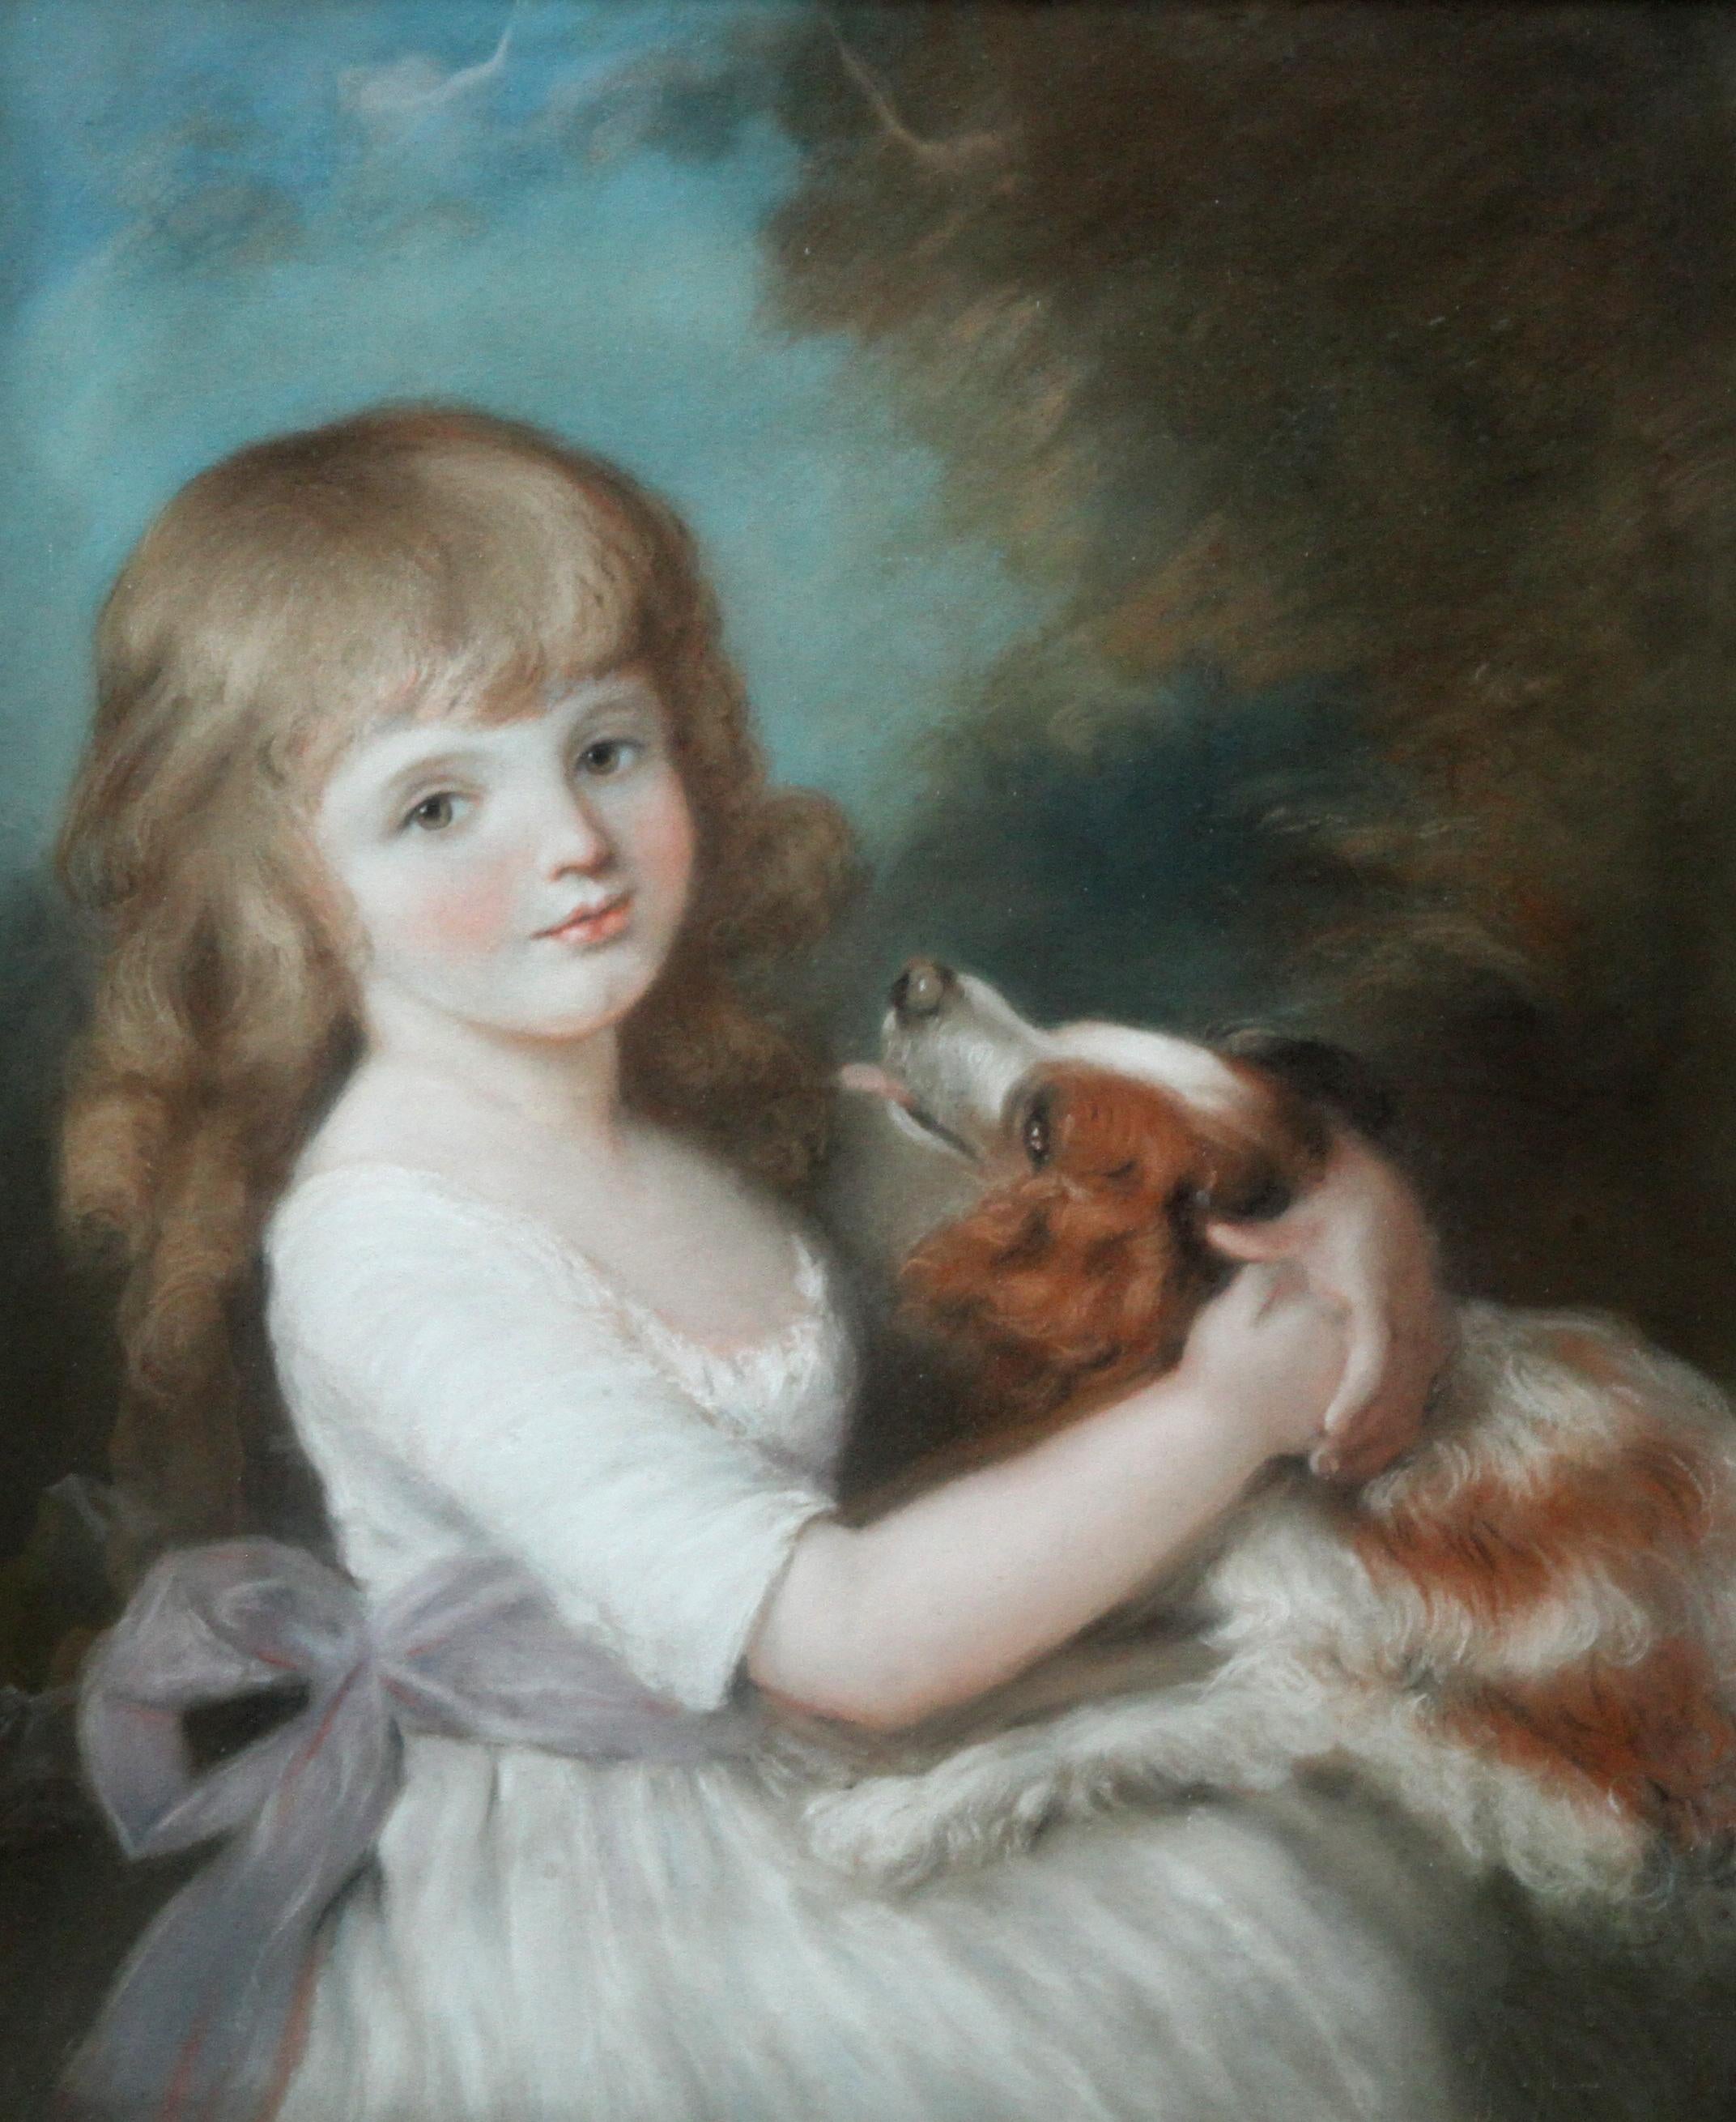 Portrait of Mary Bushby with Dog - British Old Master Regency art painting - Painting by John Russell